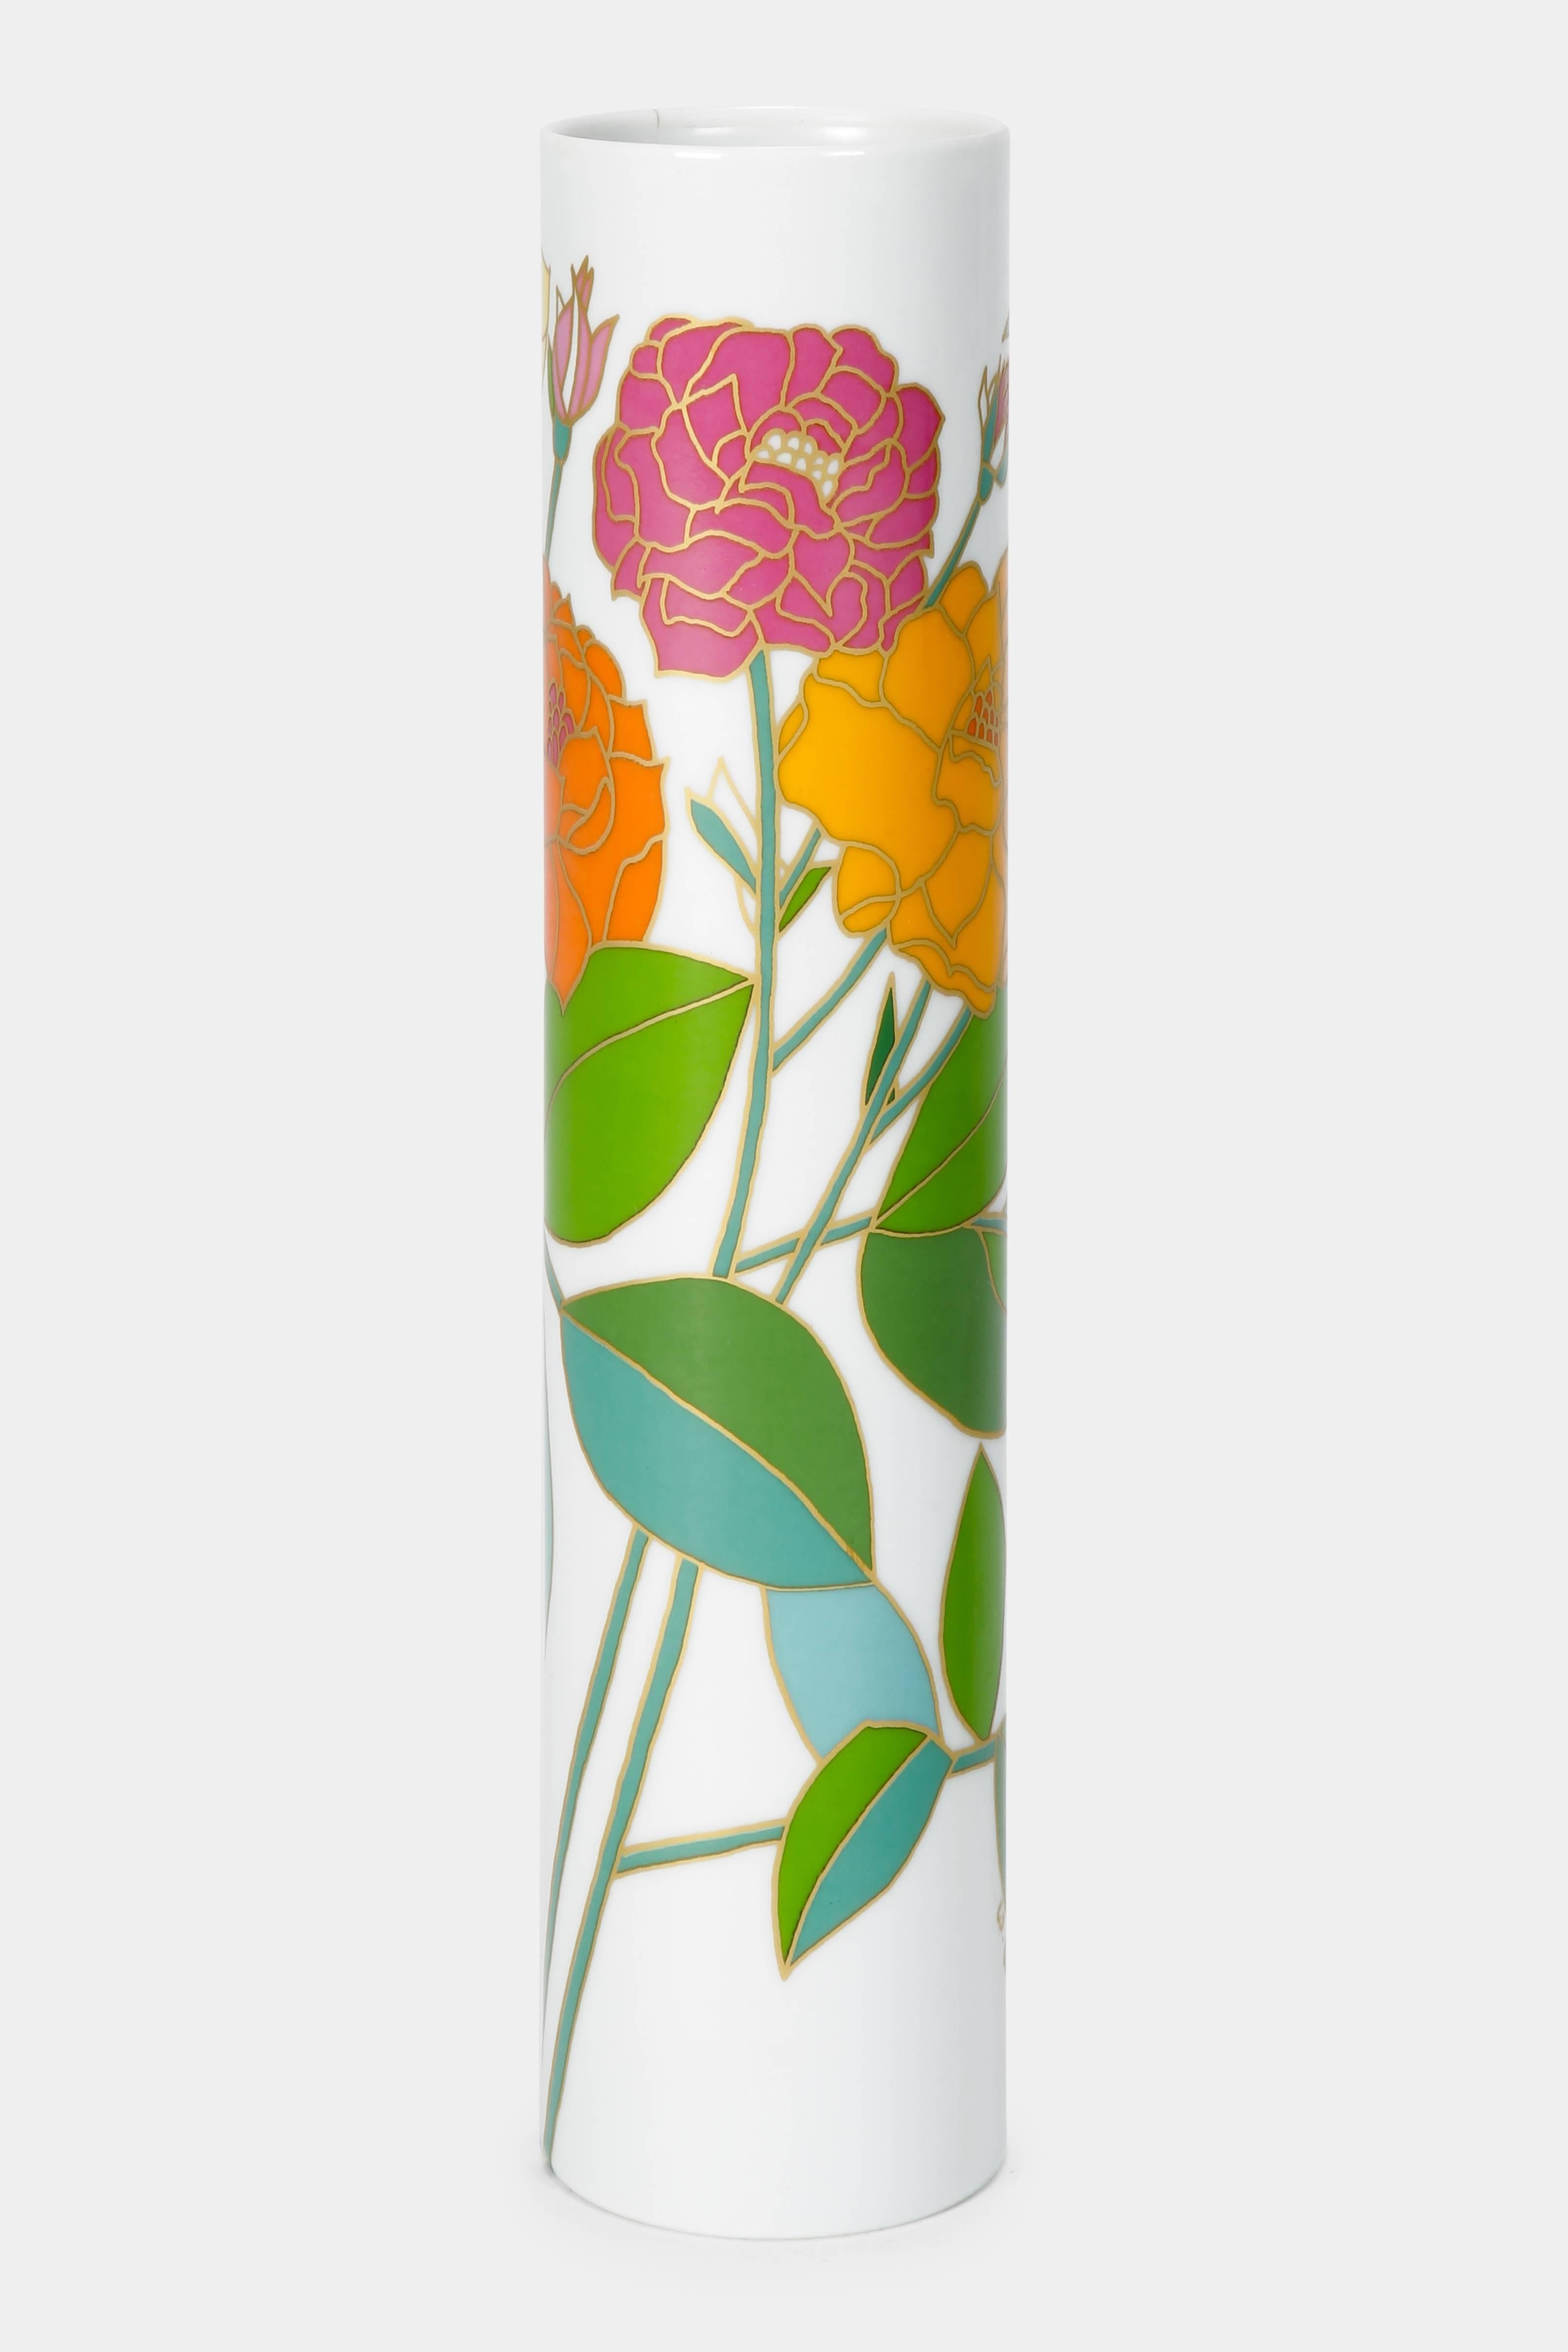 Wolf Bauer vase manufactured by Rosenthal Studio-Line in the 1970s. Beautiful floral pattern, stamp at the bottom.